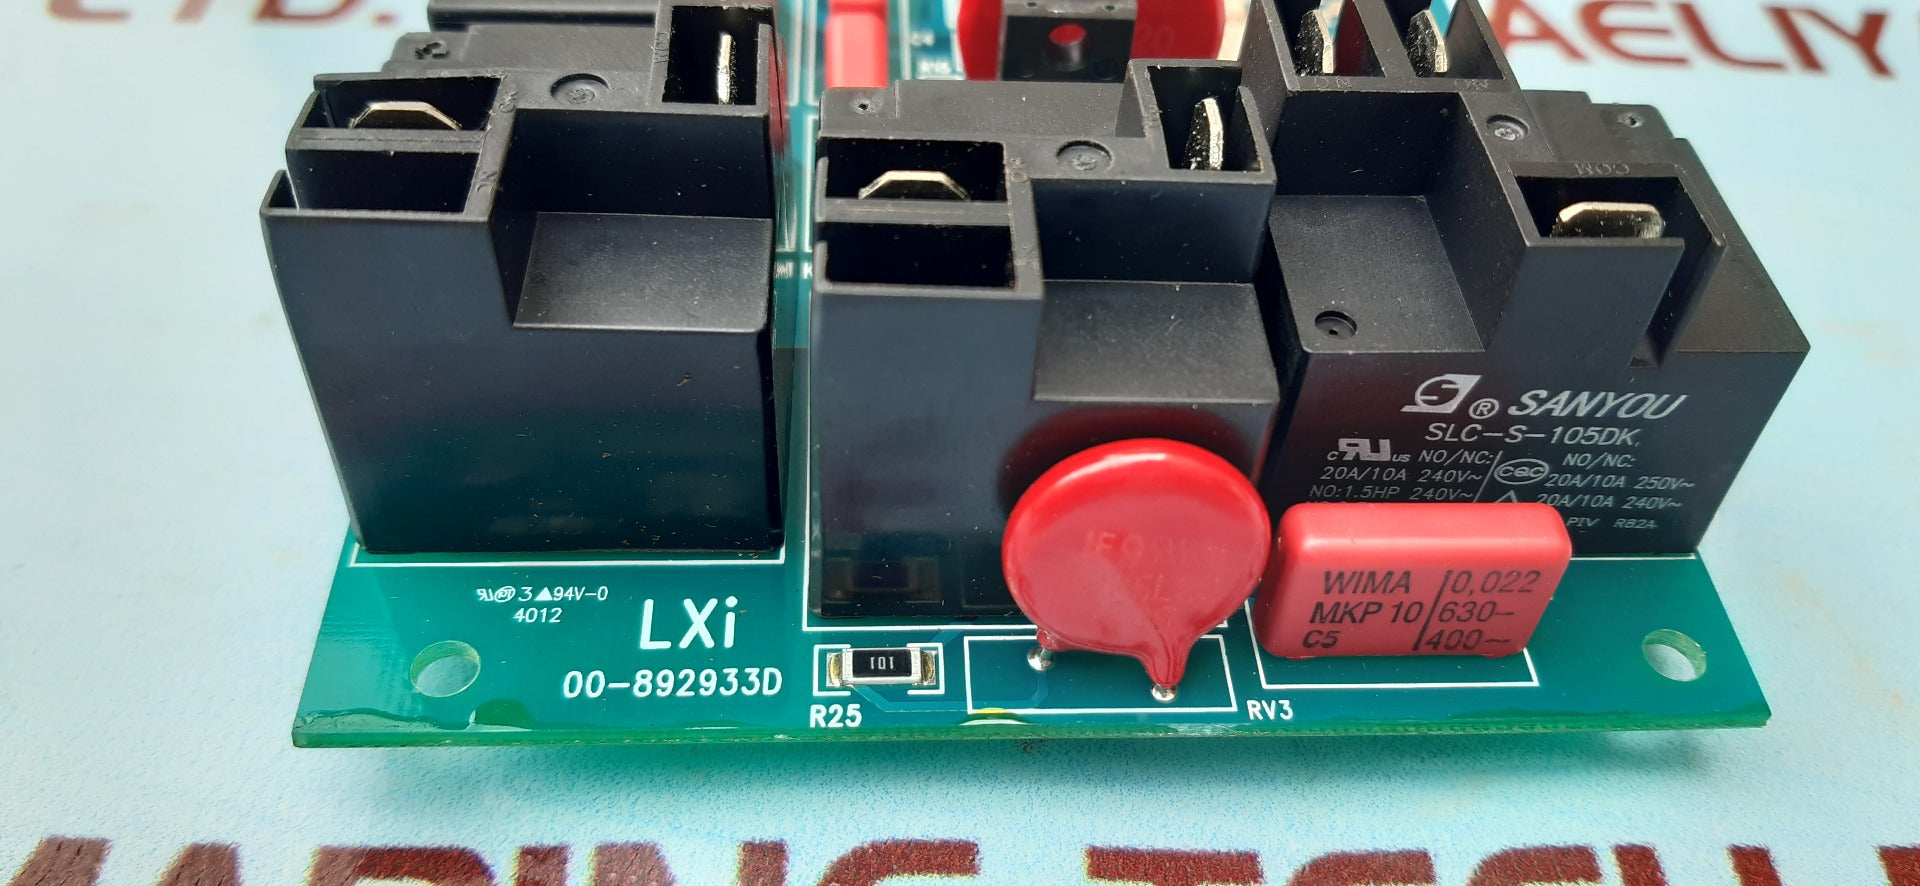 Lxi 00-892933d relay board